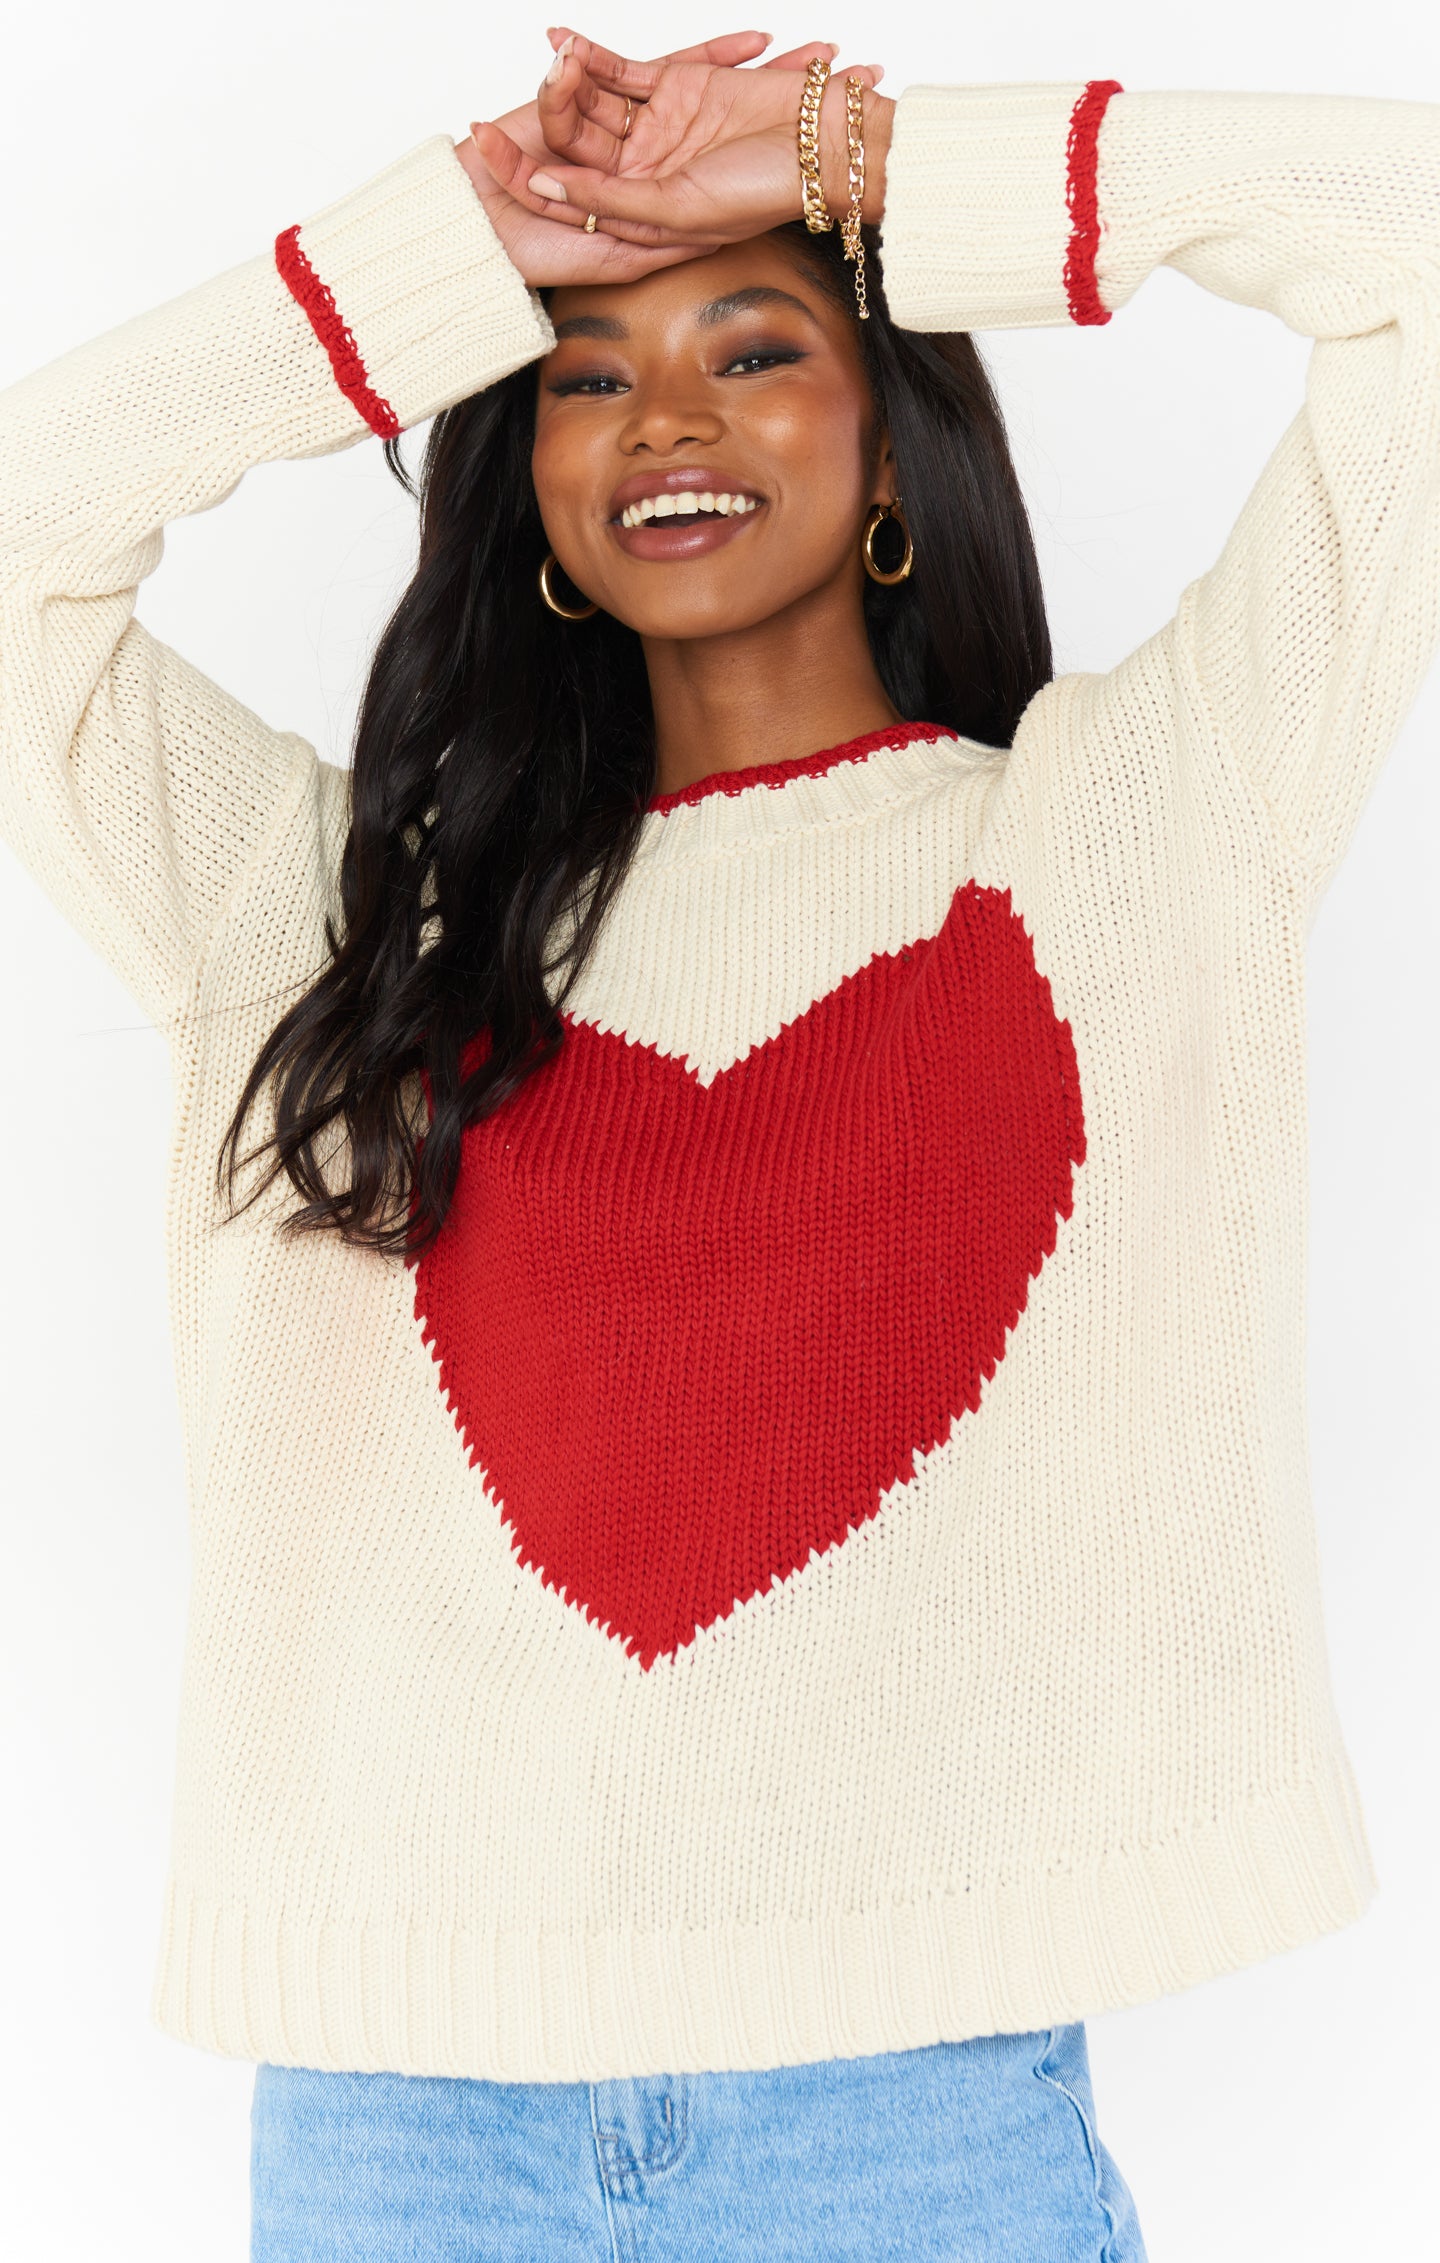 Heart sweaters That Warm the Soul缩略图